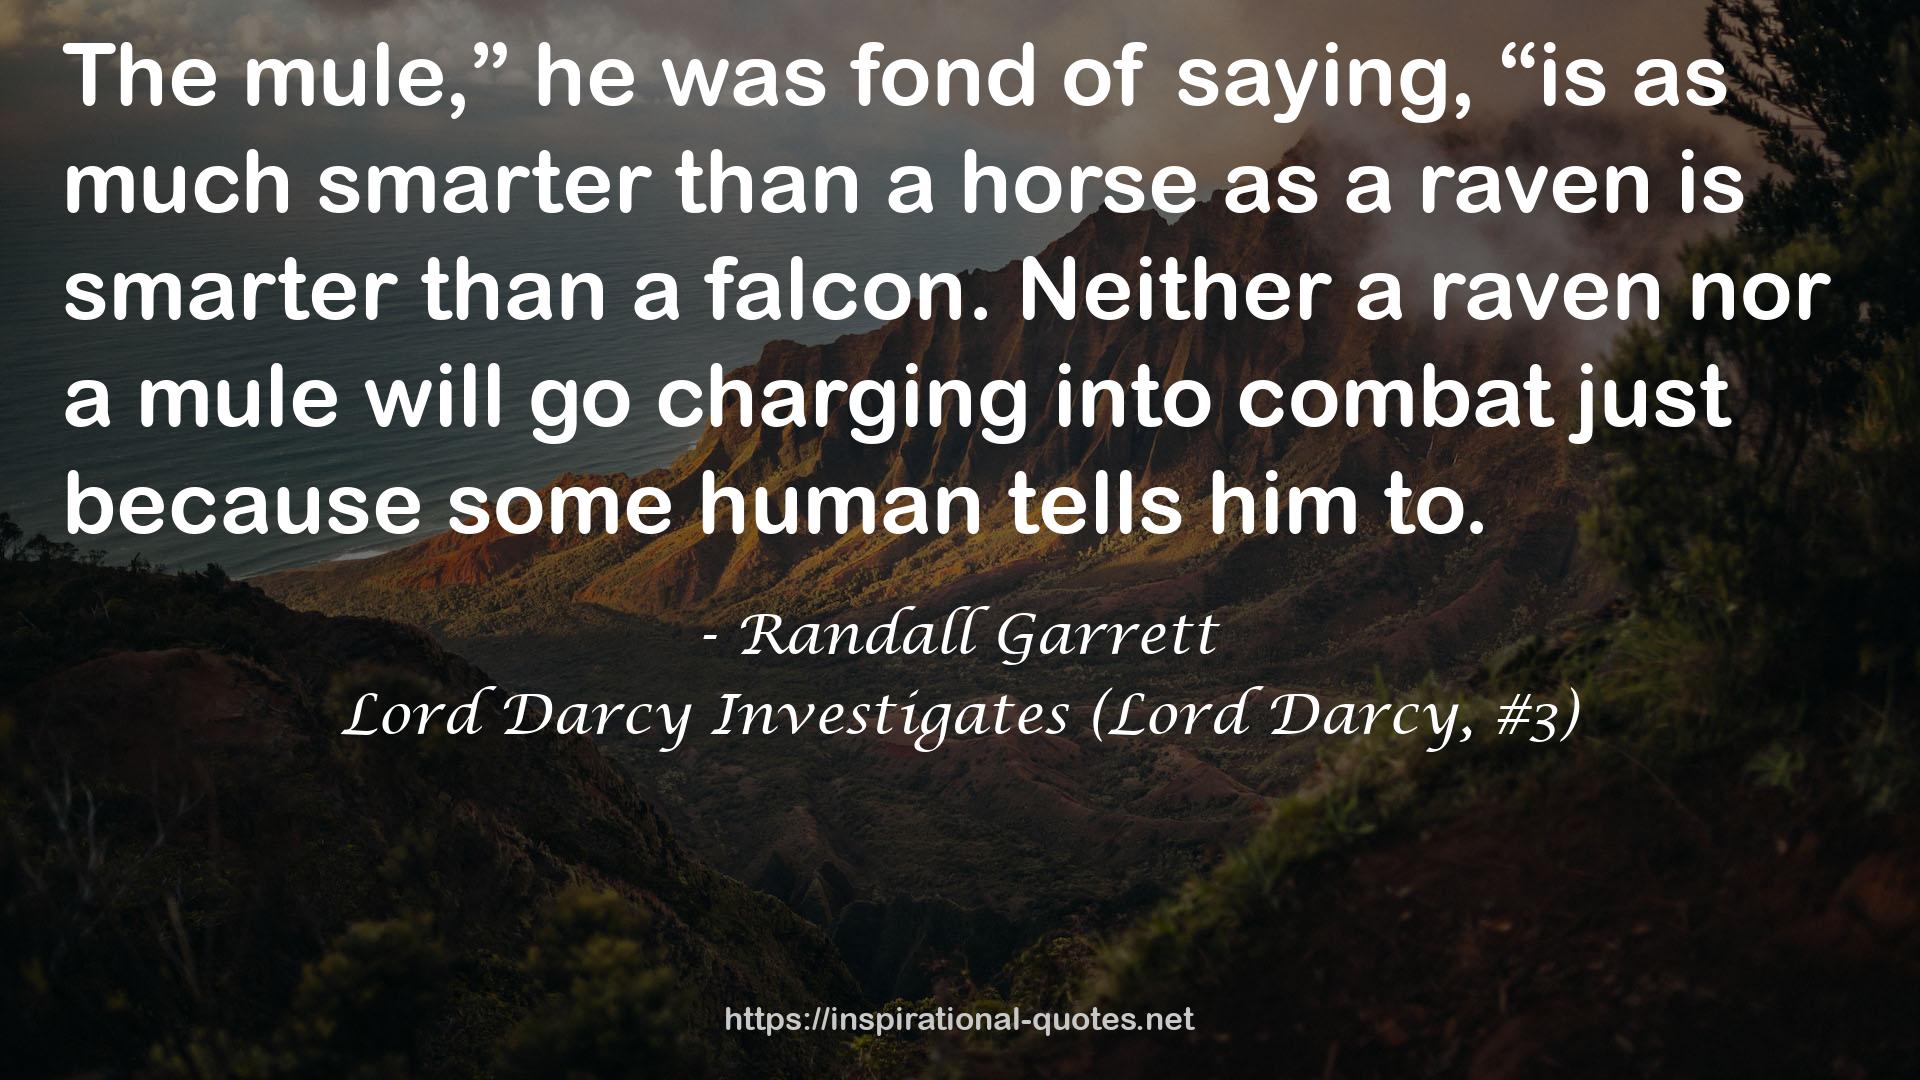 Lord Darcy Investigates (Lord Darcy, #3) QUOTES